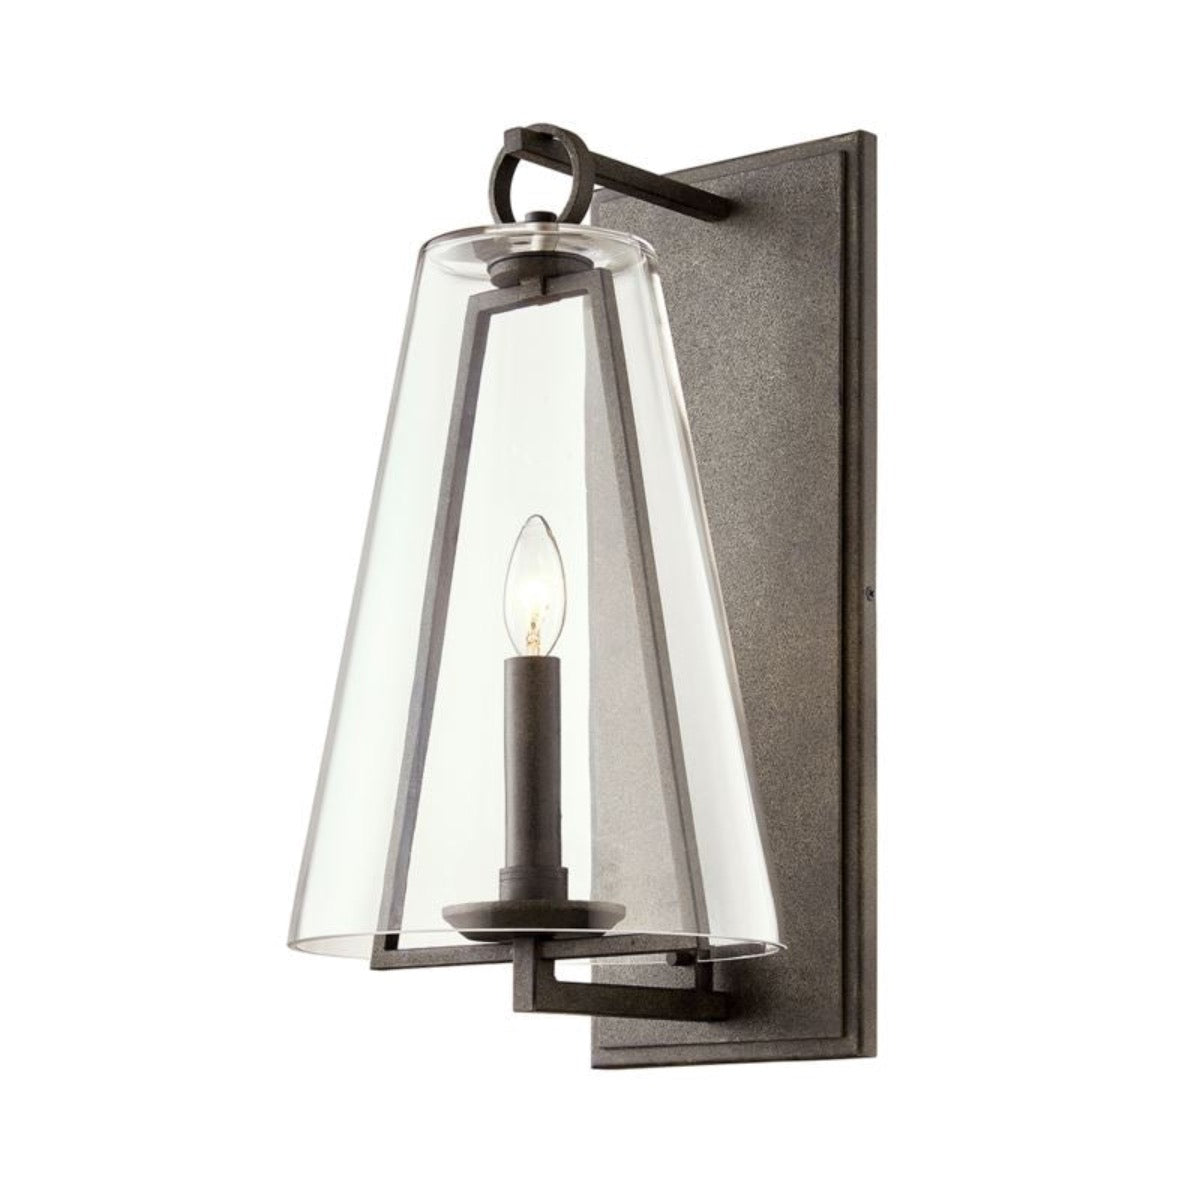 Adams Sconce. Left angle view.